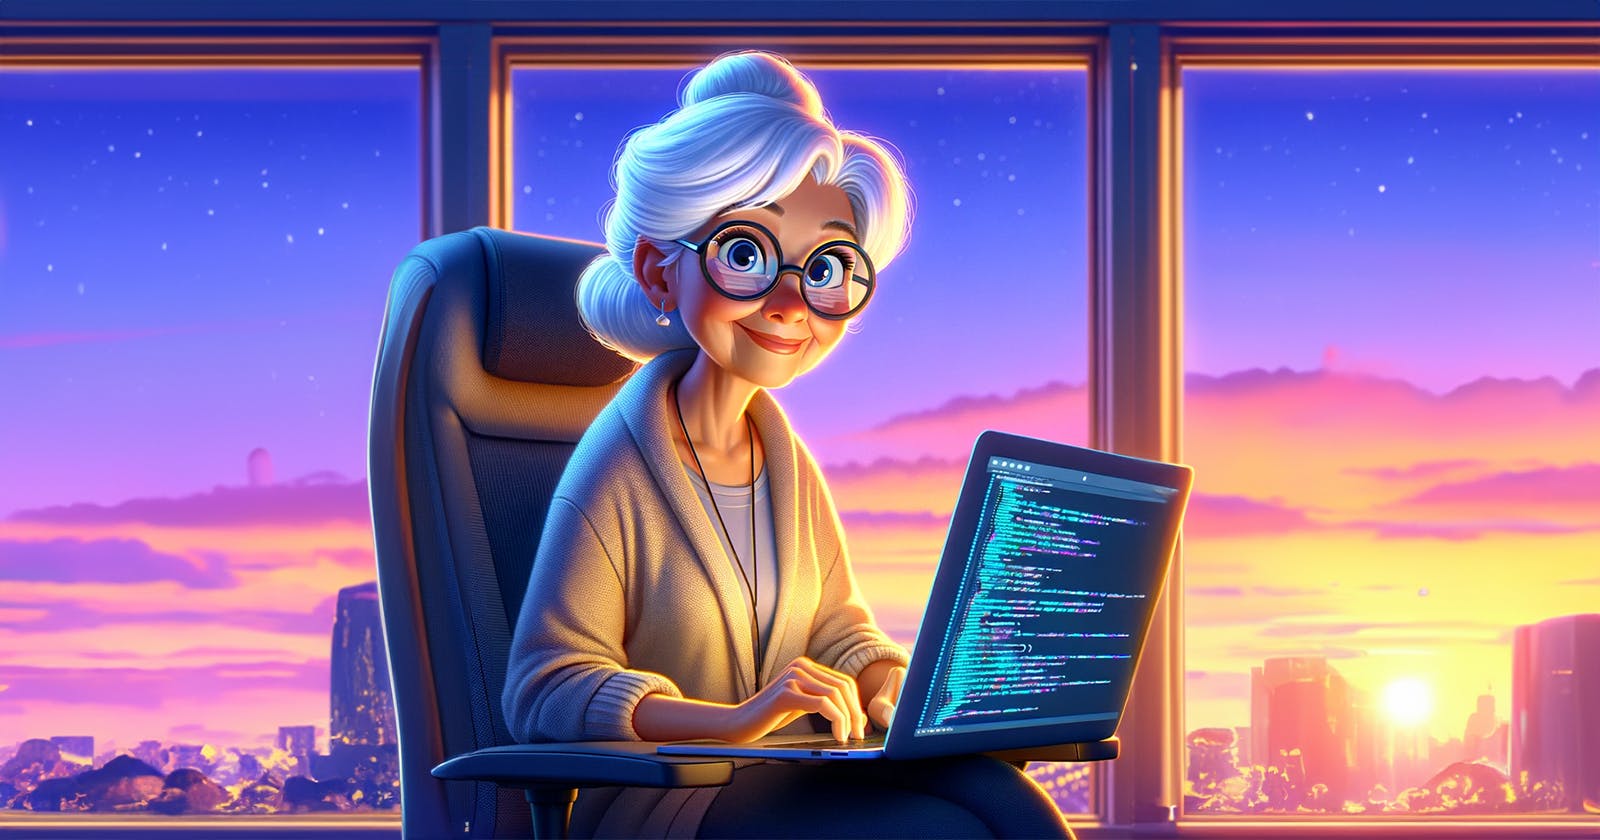 👵🏼 It’s Never Too Late to Learn: Meet “The World’s Oldest Developer”